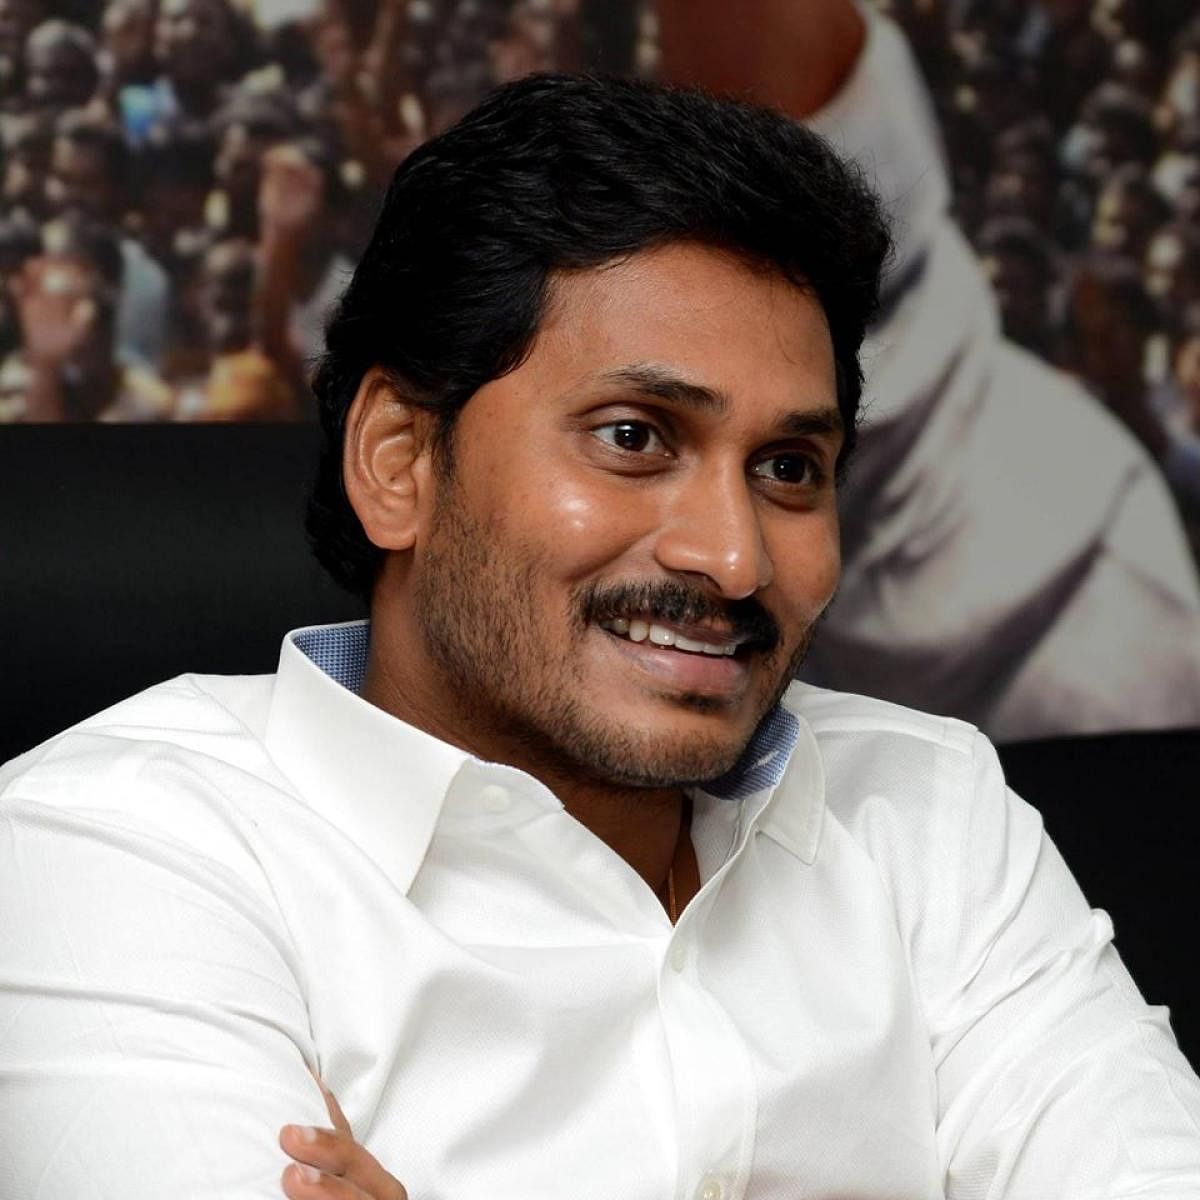 YS Jagan Mohan Reddy is the Chief Minister of Andhra Pradesh. (Credit: Facebook)